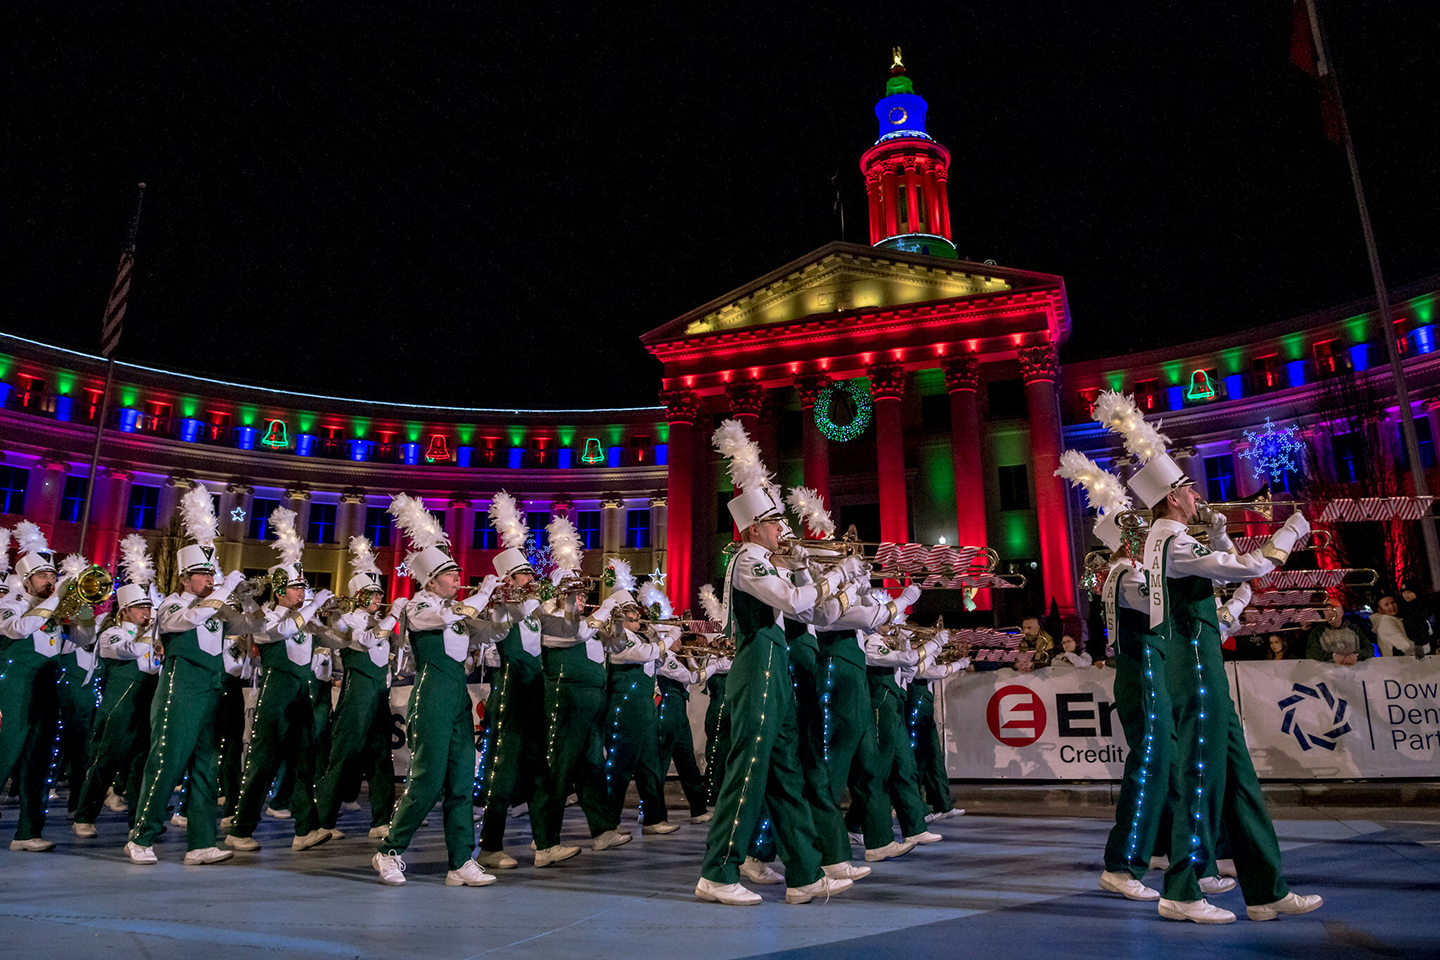 A marching band at the Denver Parade of Lights 